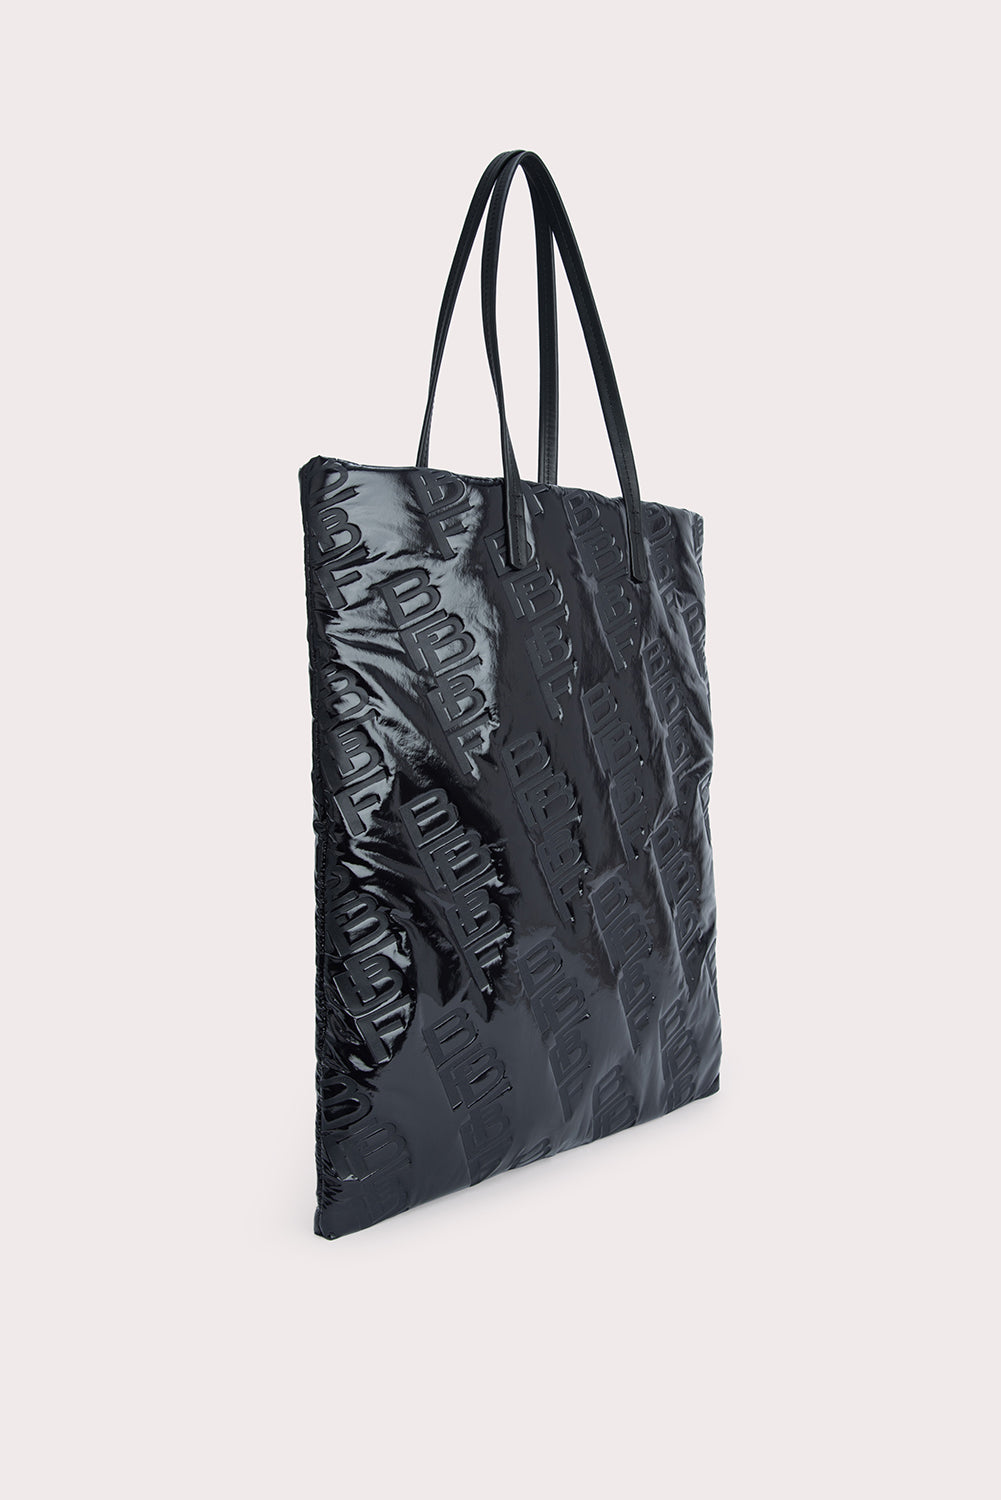 Slim Tote Black Embossed Shellsuit Fabric and Leather - BY FAR